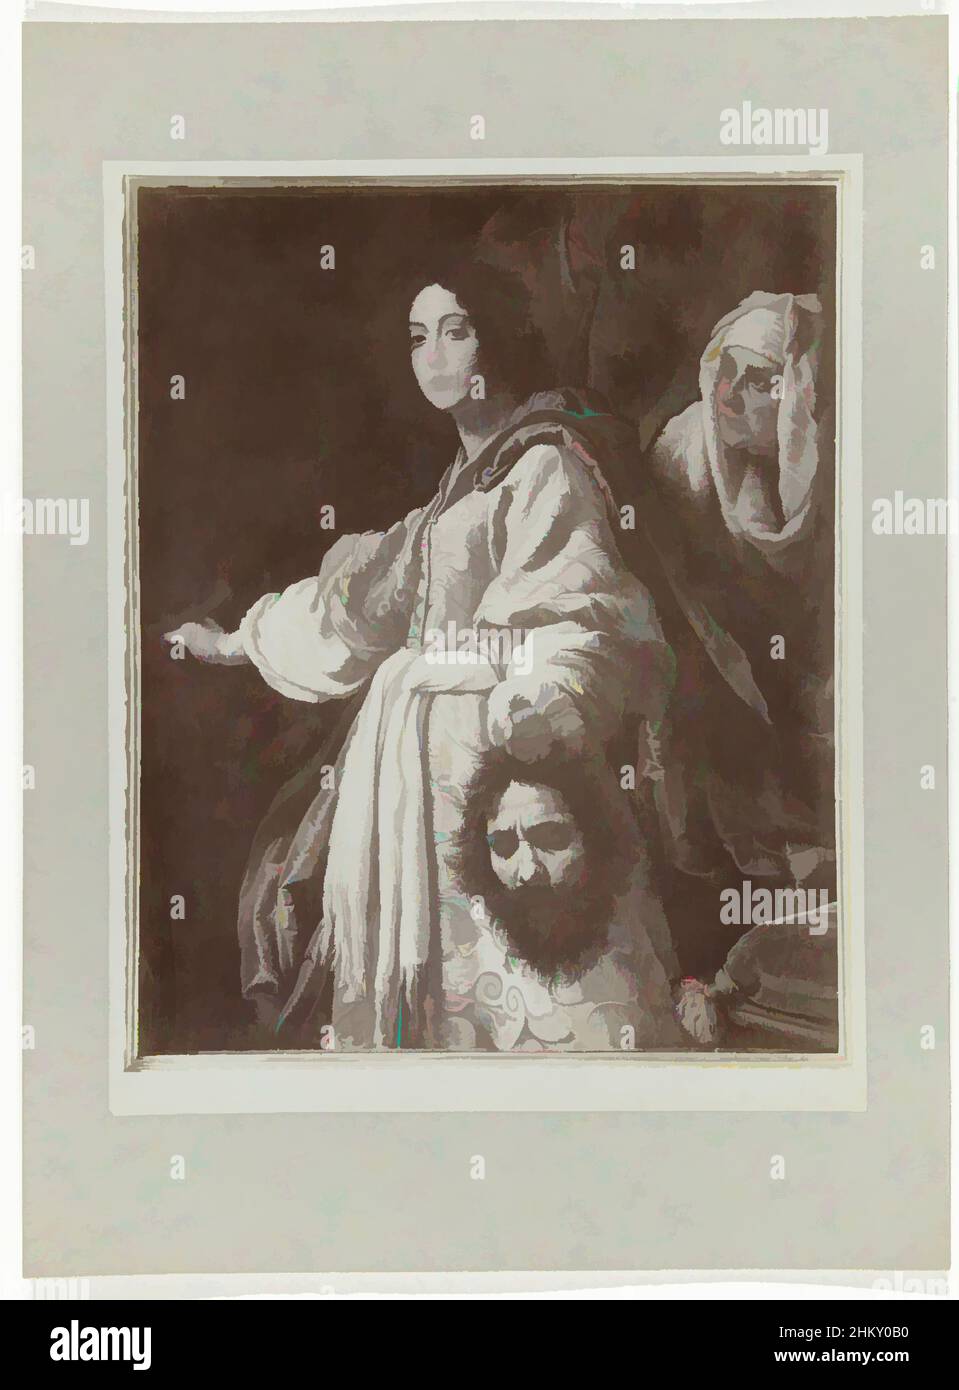 Art inspired by Painting of Judith with the head of Holofernes, P.e 2.a N.o 8. FIRENZE - R. Galleria Pitti. La Giuditta. (Cristofano Allori.), Painting made by Cristofano Allori., Fratelli Alinari, publisher: Fratelli Alinari, Florence, c. 1880 - c. 1895, paper, albumen print, height, Classic works modernized by Artotop with a splash of modernity. Shapes, color and value, eye-catching visual impact on art. Emotions through freedom of artworks in a contemporary way. A timeless message pursuing a wildly creative new direction. Artists turning to the digital medium and creating the Artotop NFT Stock Photo